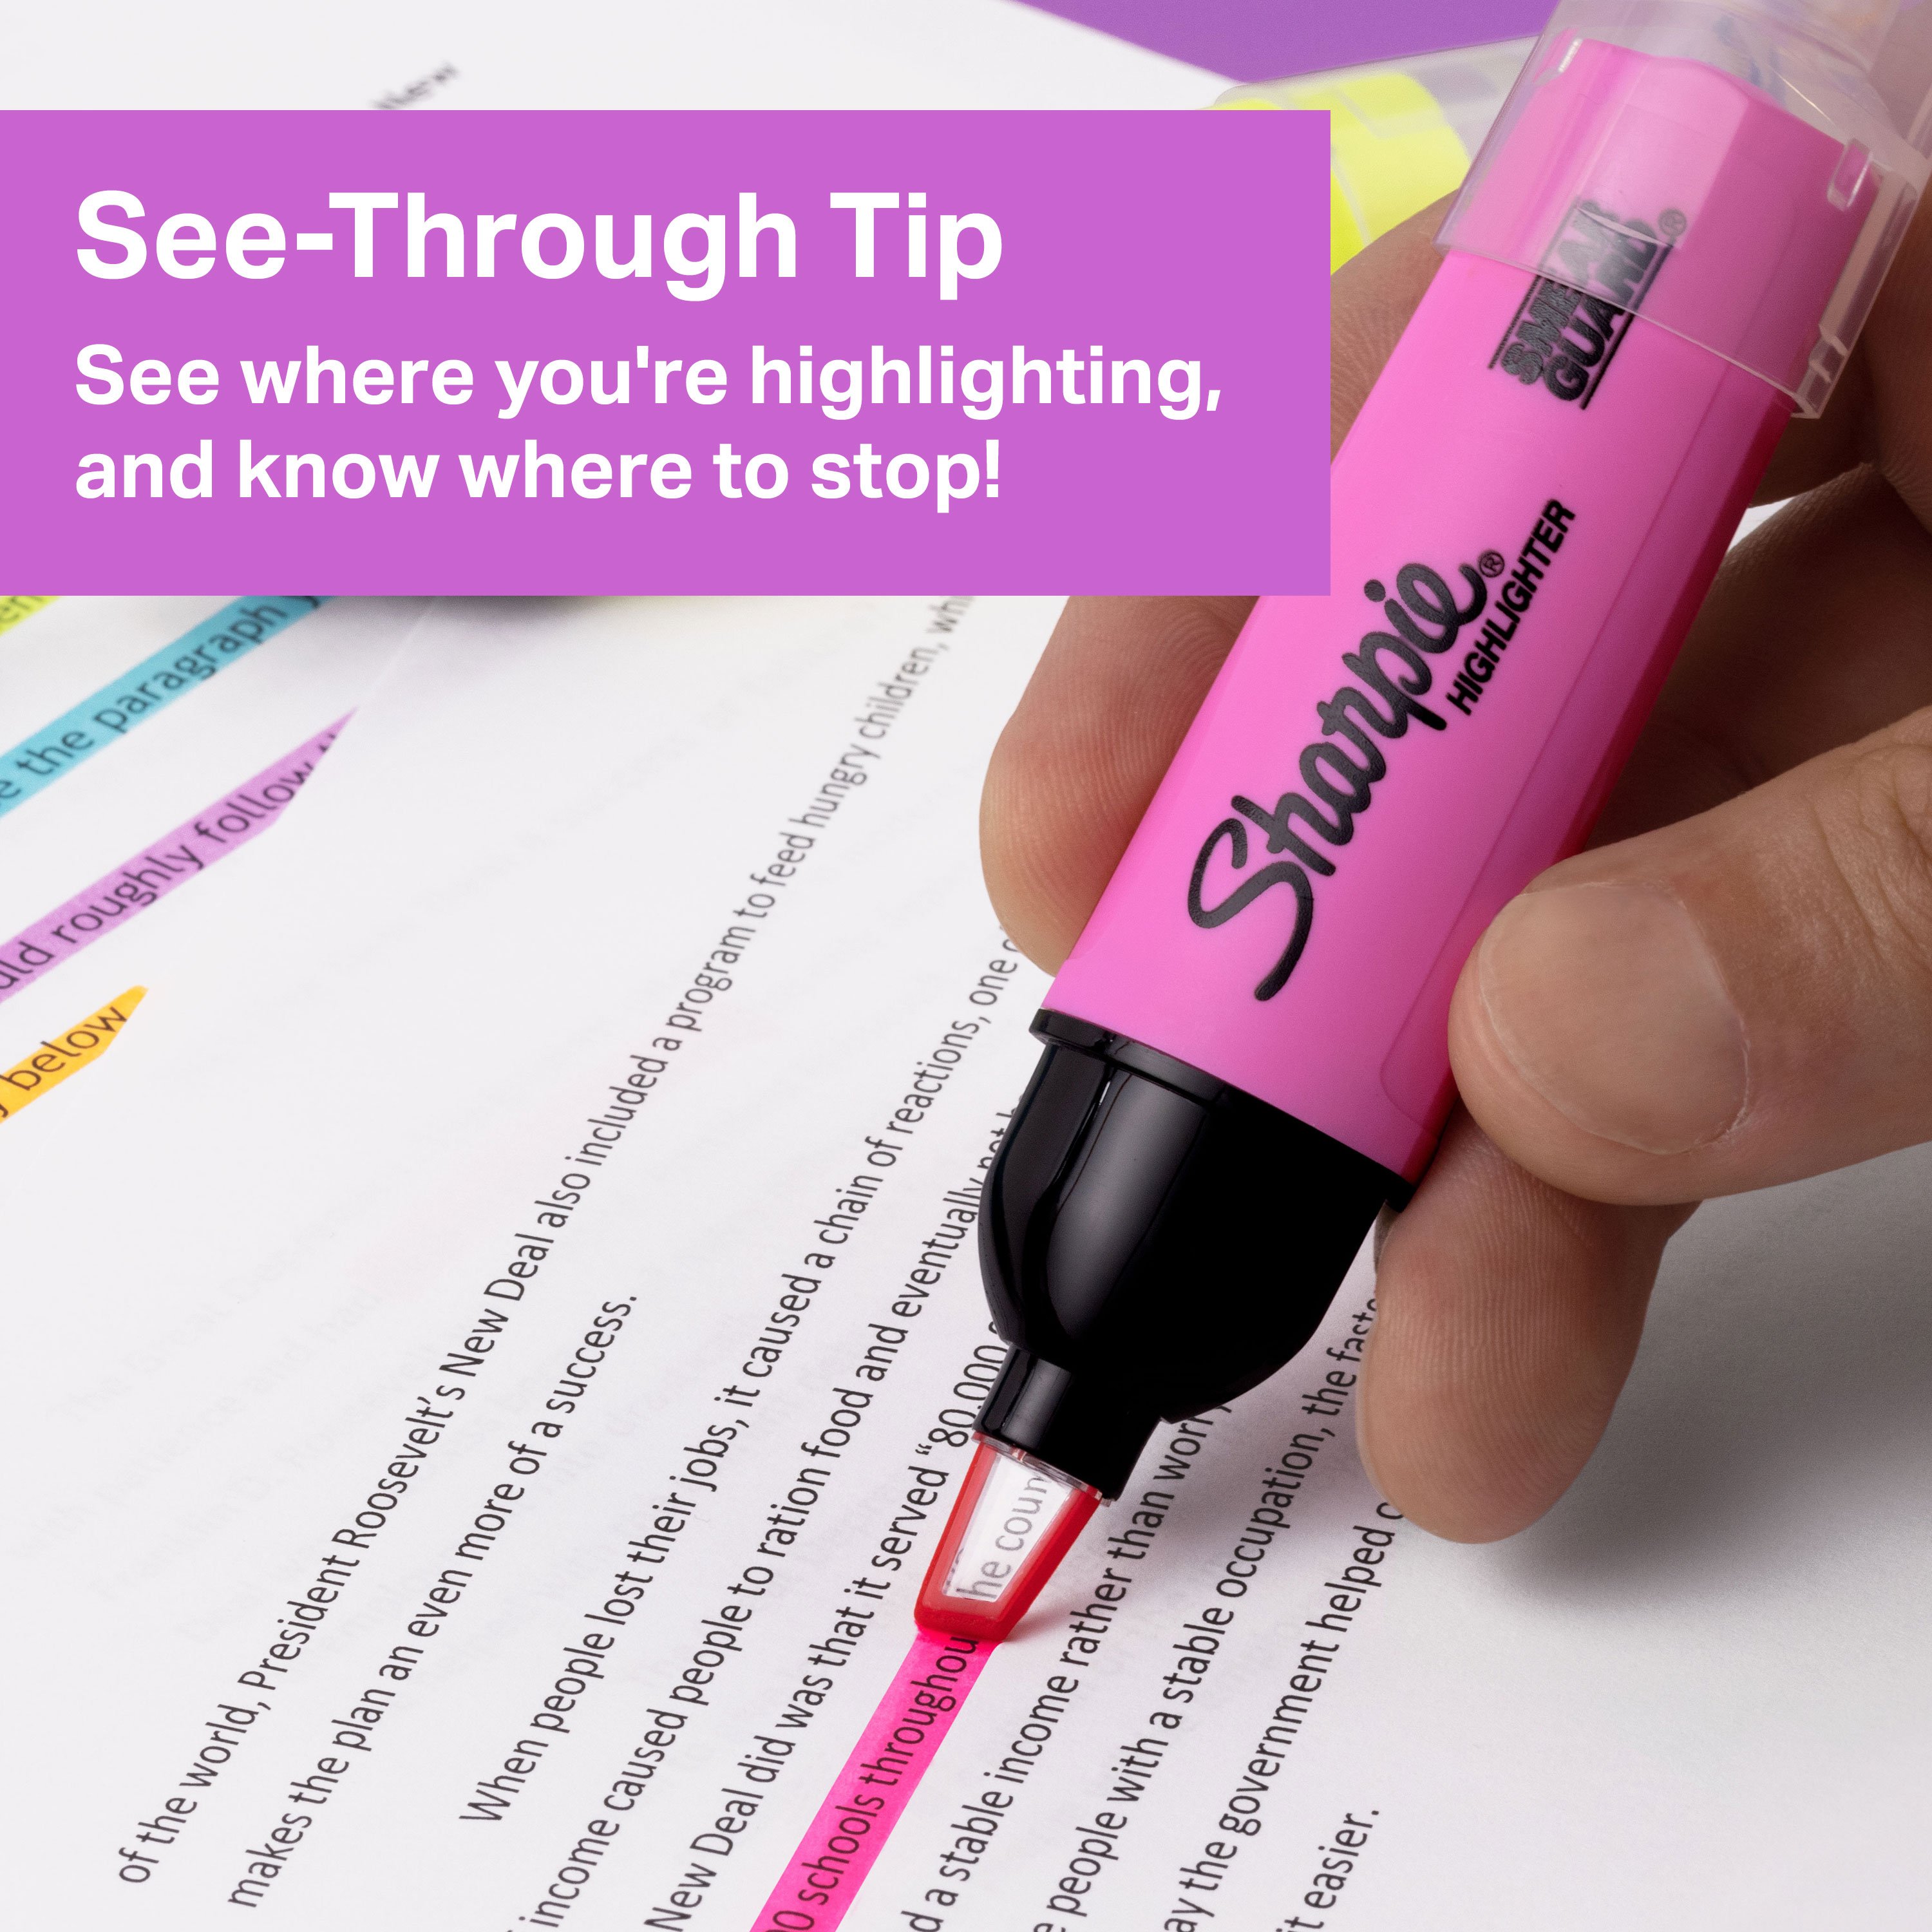 Sharpie Clear View Tank Highlighter, Chisel Tip, Yellow, 3/Pack (1904613)